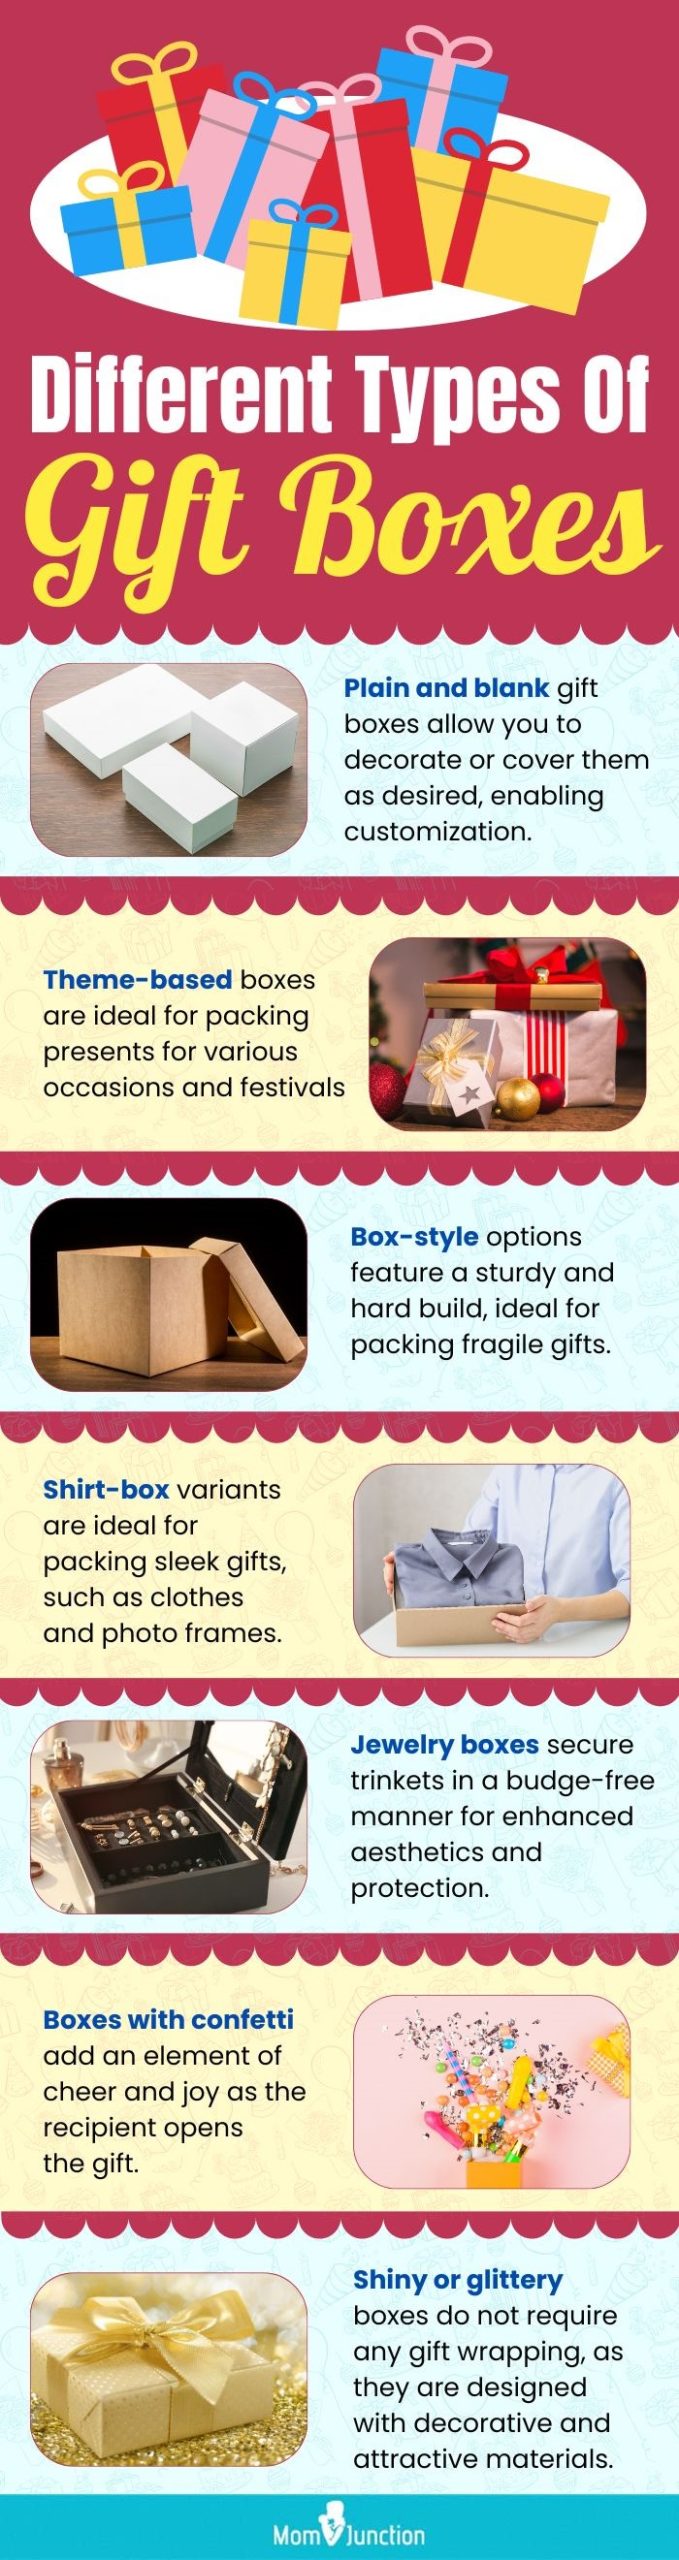 Different Types Of Gift Boxes (infographic)